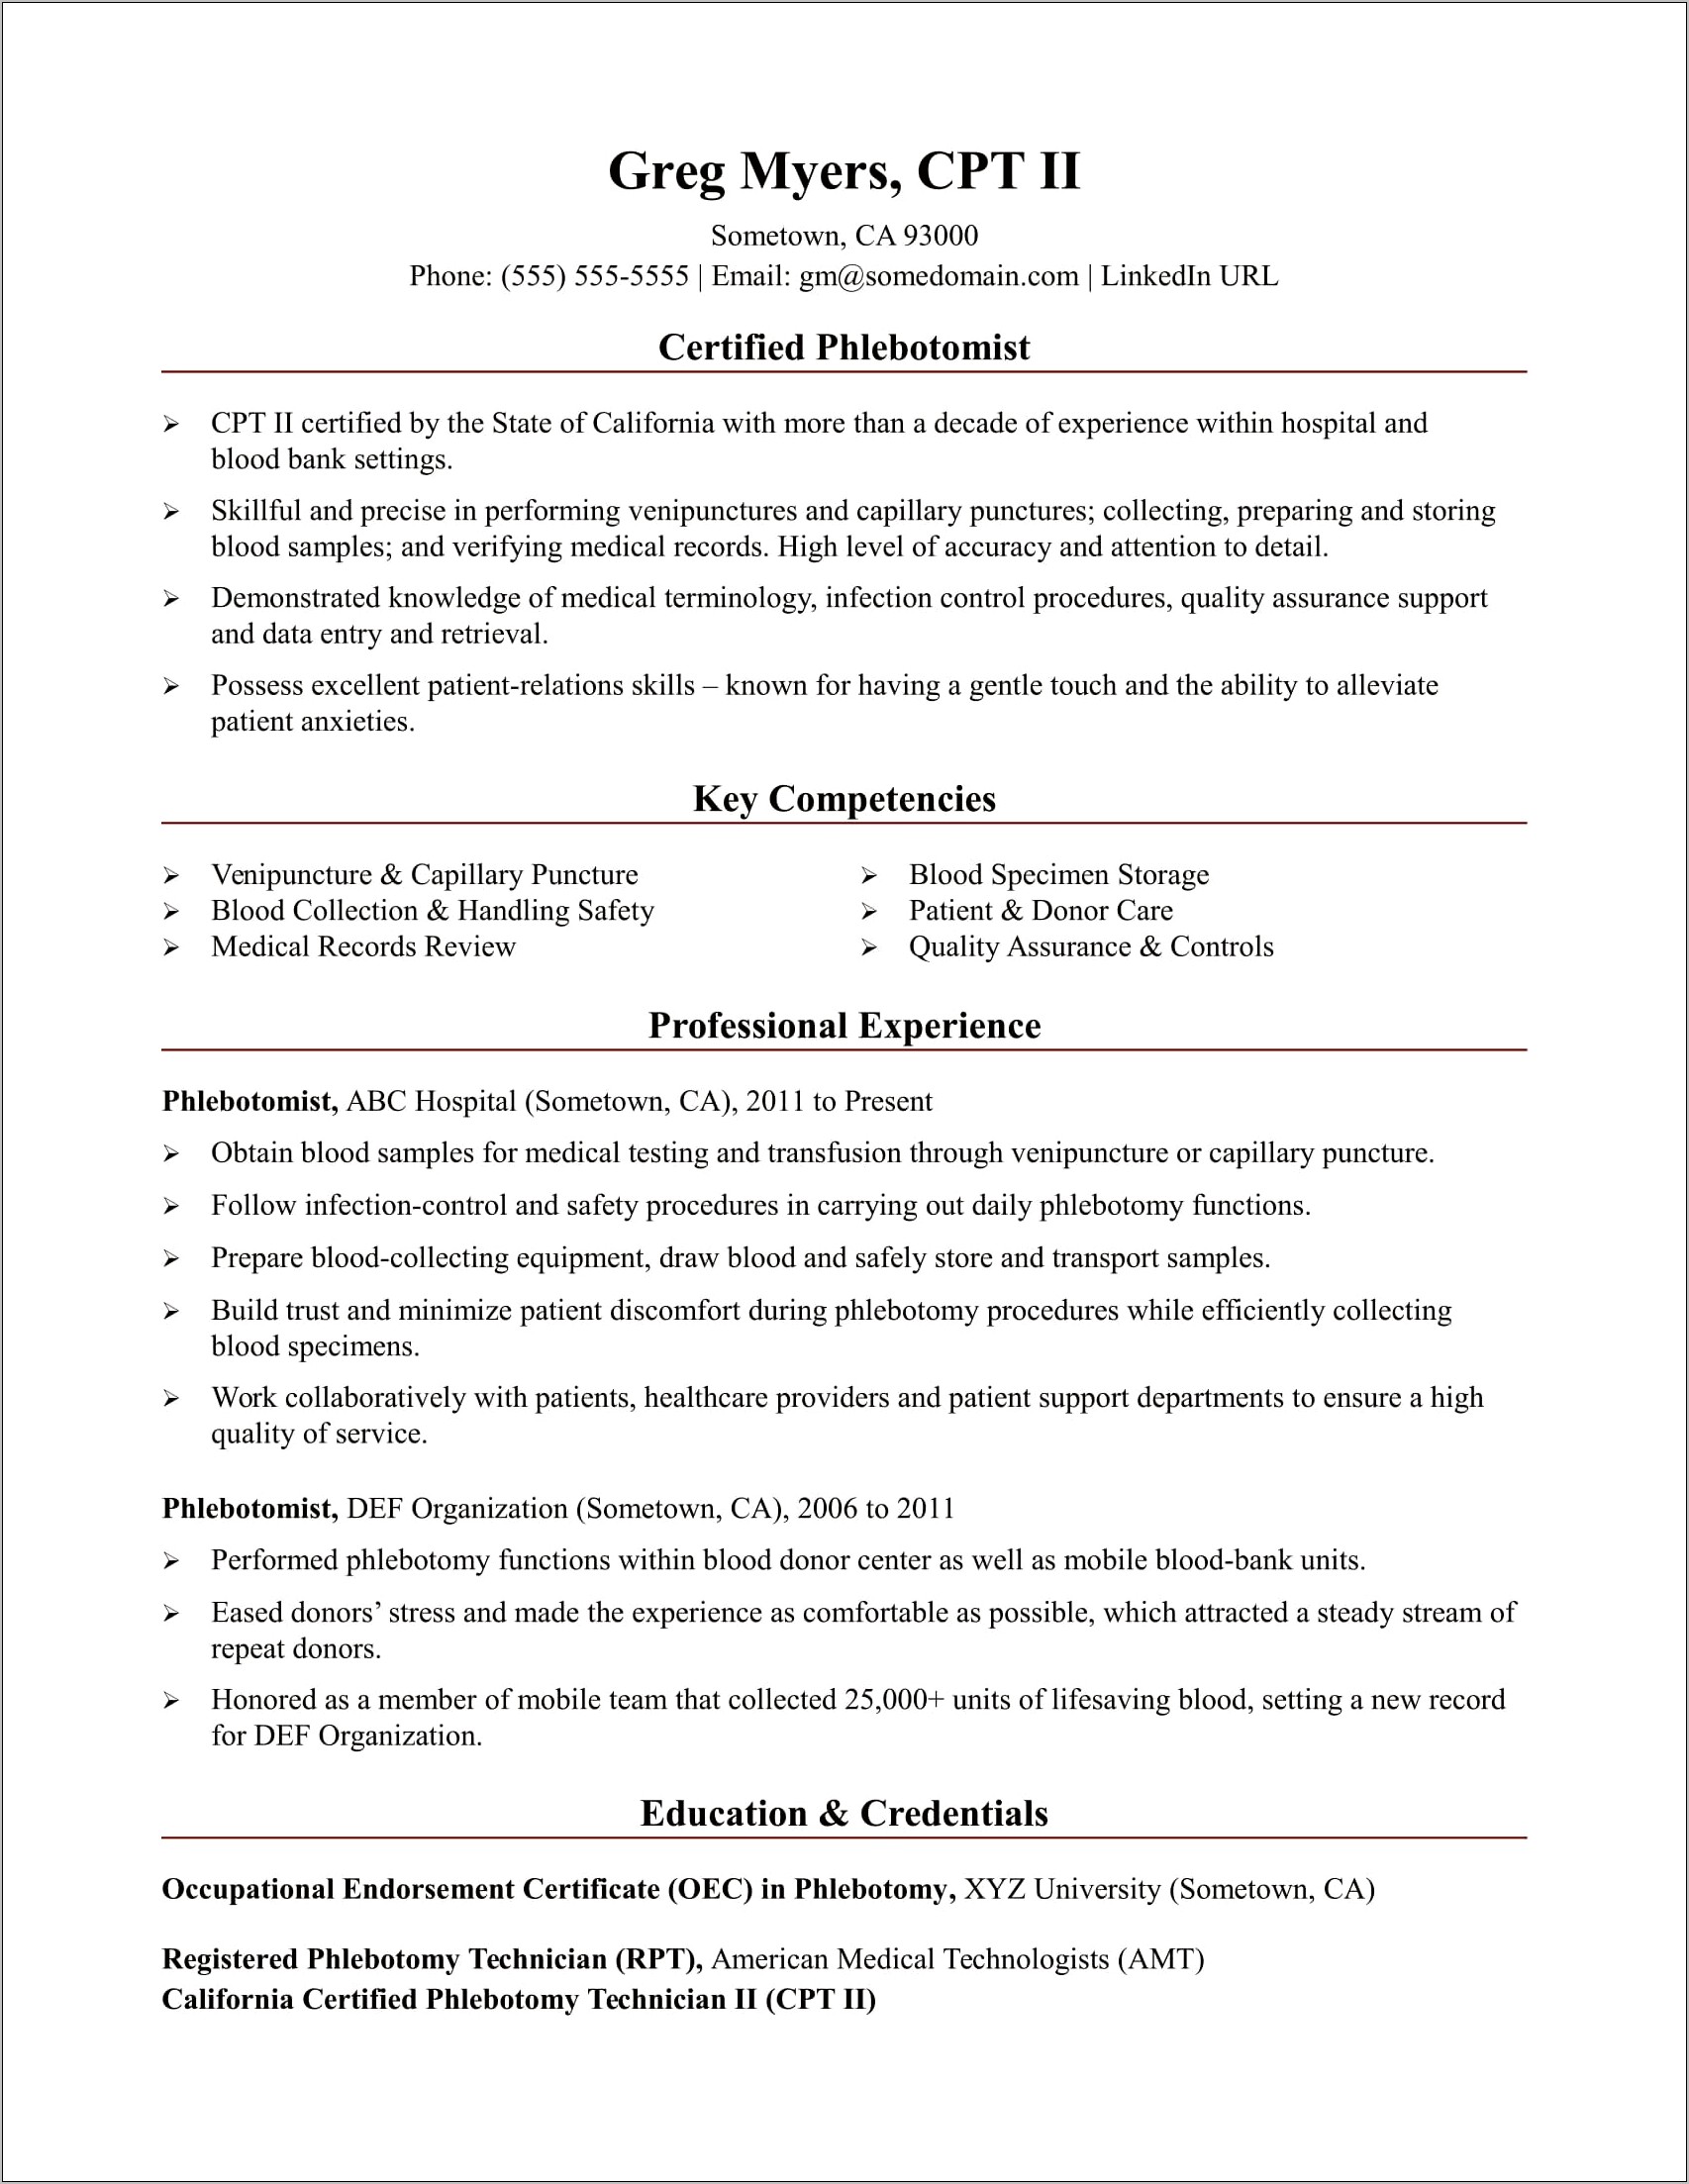 Resume Objective Samples For Healthcare